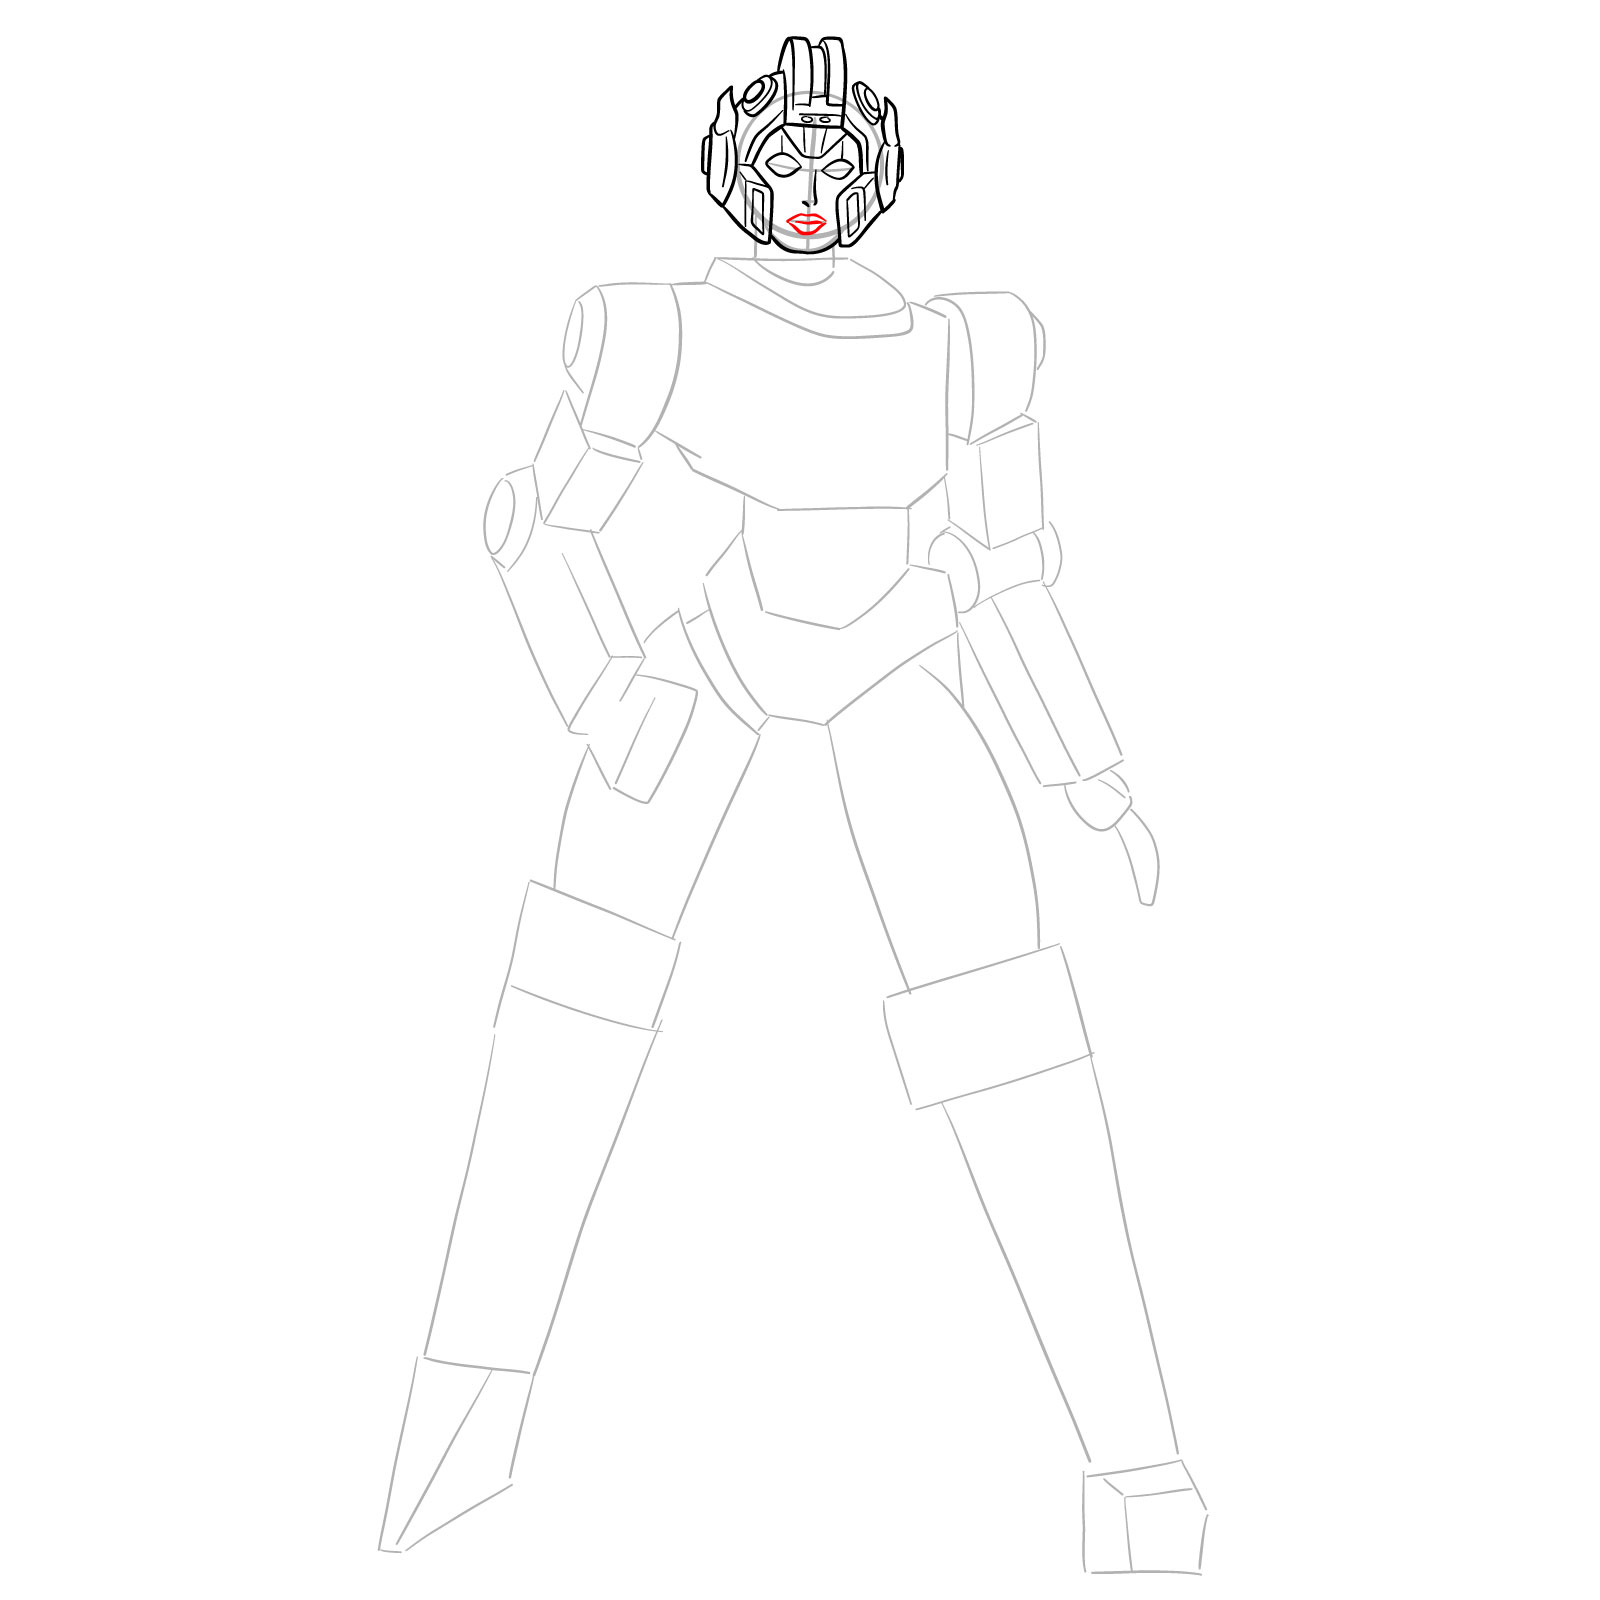 How to draw Arcee from Transformers Prime - step 11